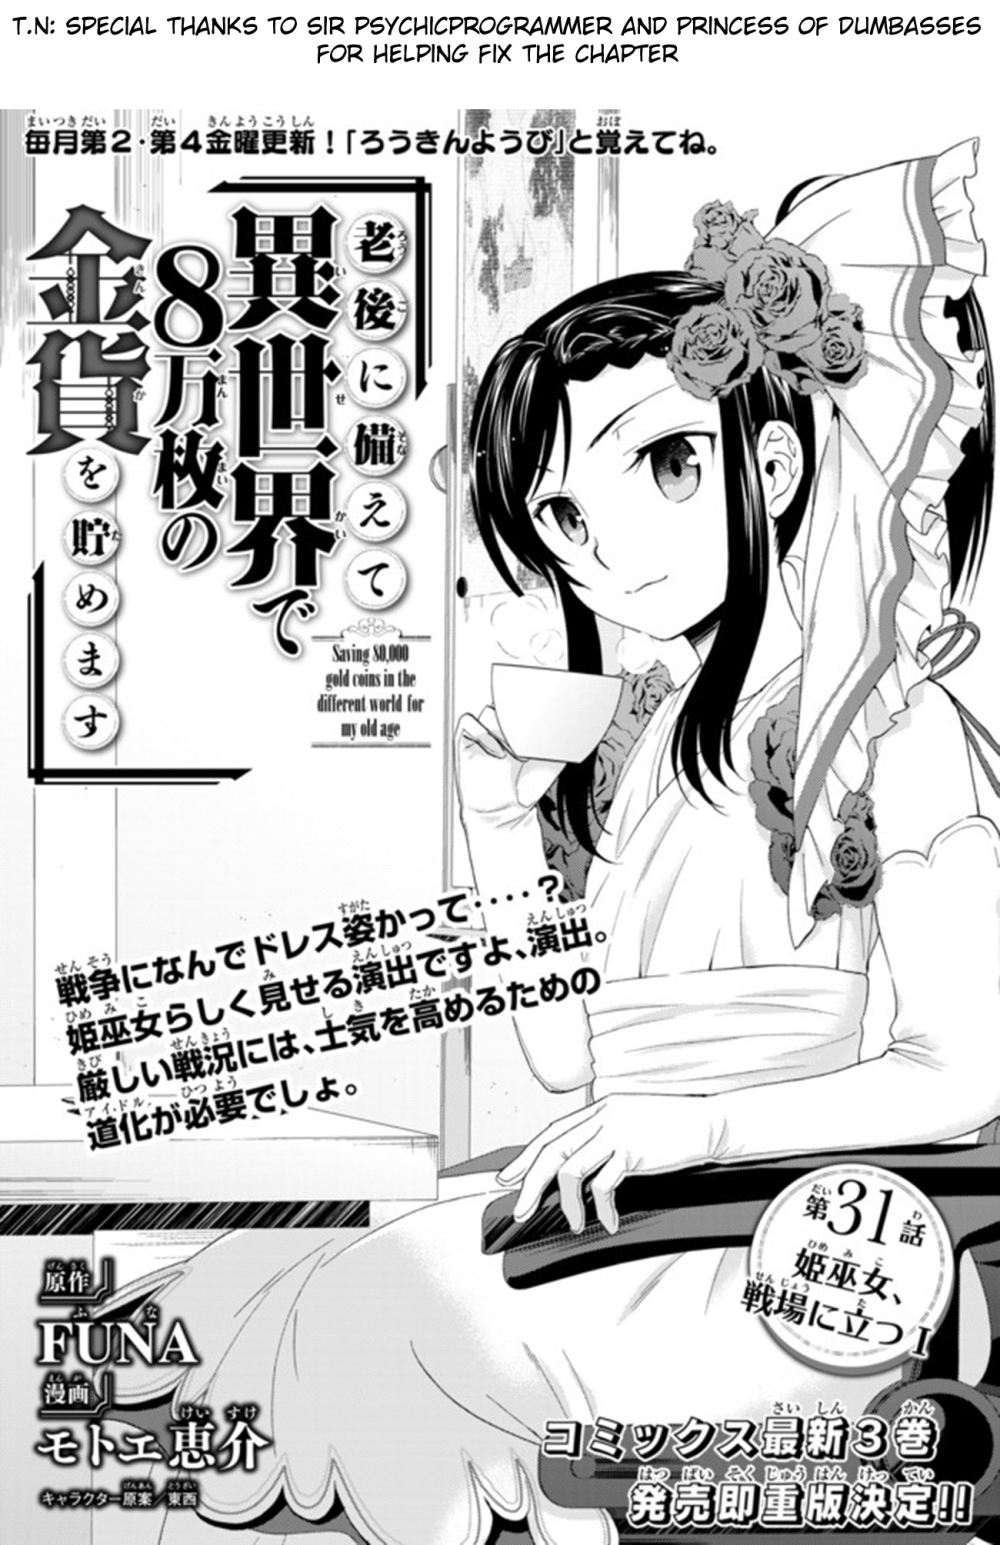 Saving 80,000 Gold Coins In The Different World For My Old Age Vol.4 Chapter 31: Shrine Princess, To The Battlefield (Part 1) - Picture 1